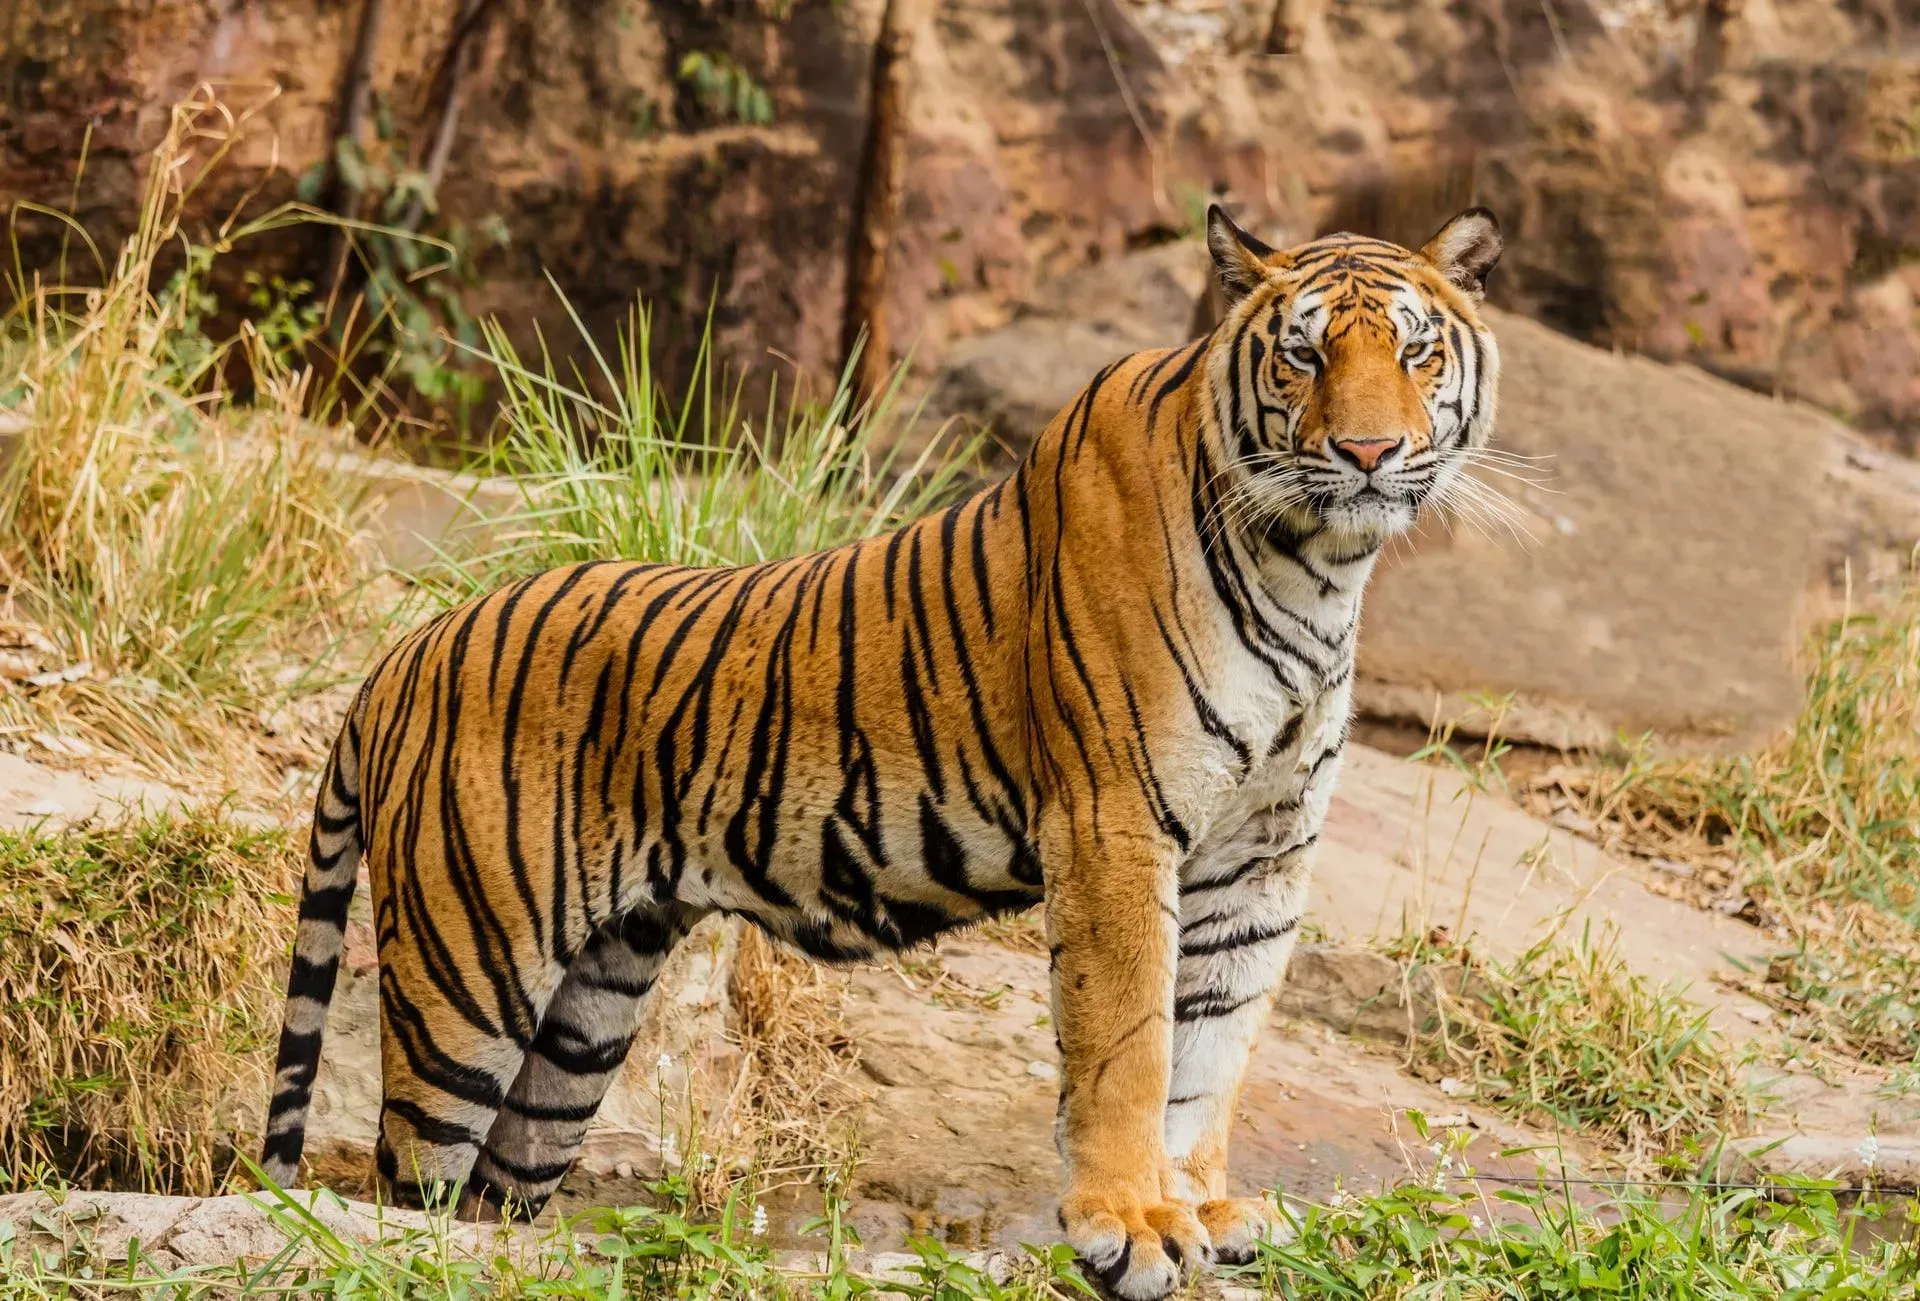 The answer to how much does a tiger weigh depends on the age and subclass of the tiger.